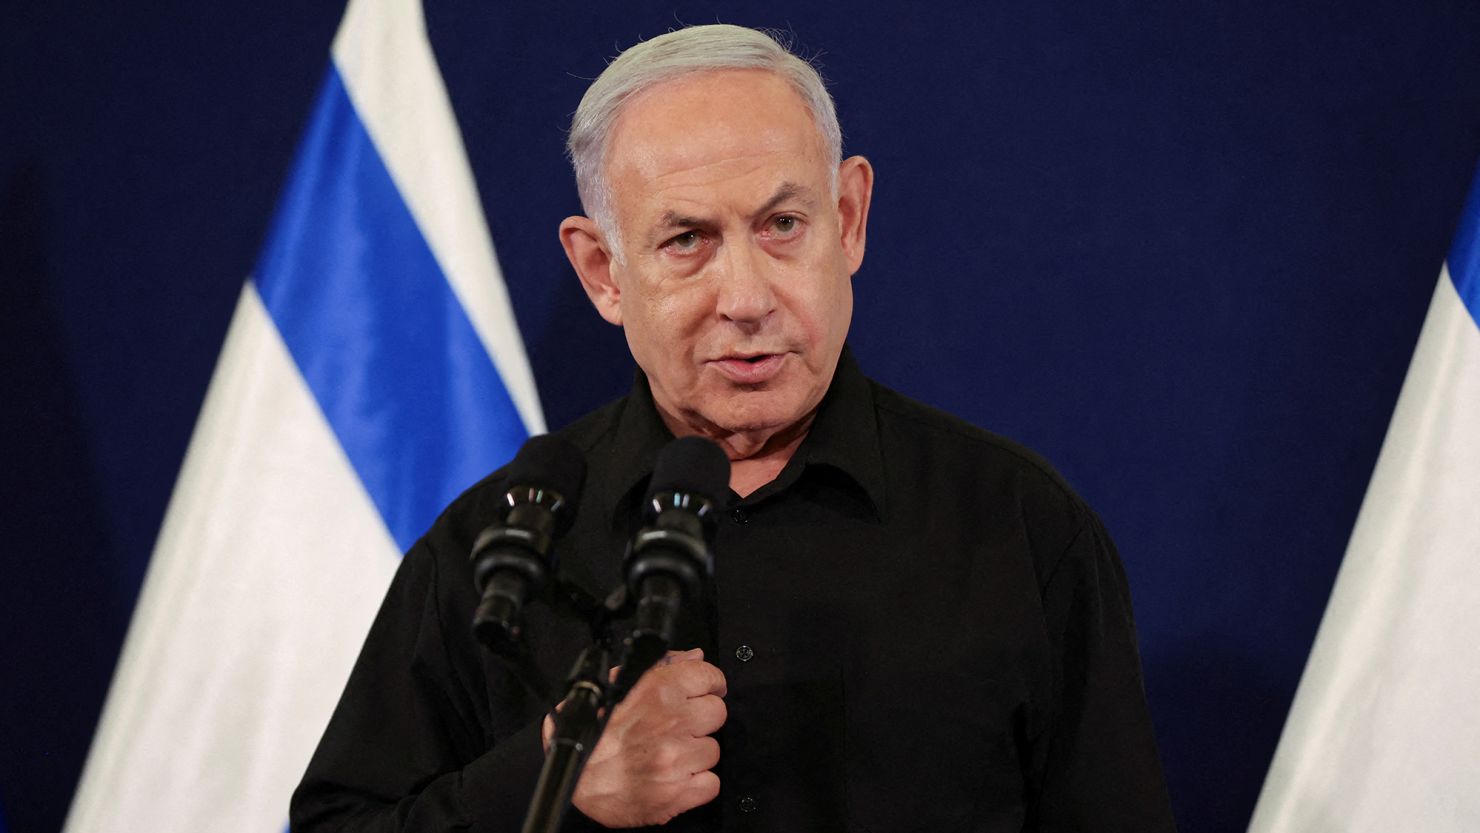 Israeli leaders and military criticize reported US plans to sanction ...